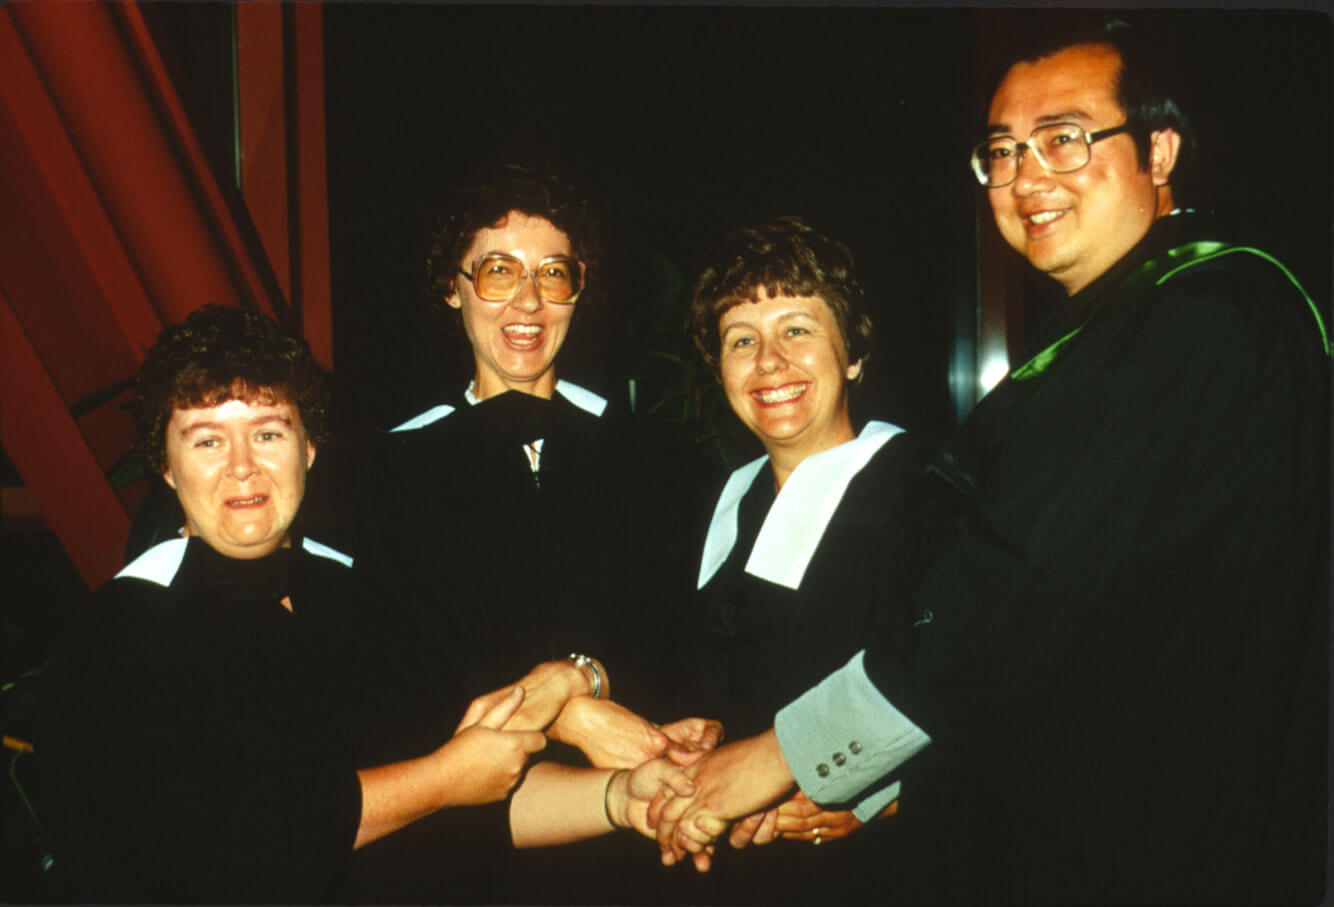 In this photo, taken around 1986, graduates join hands in celebration.